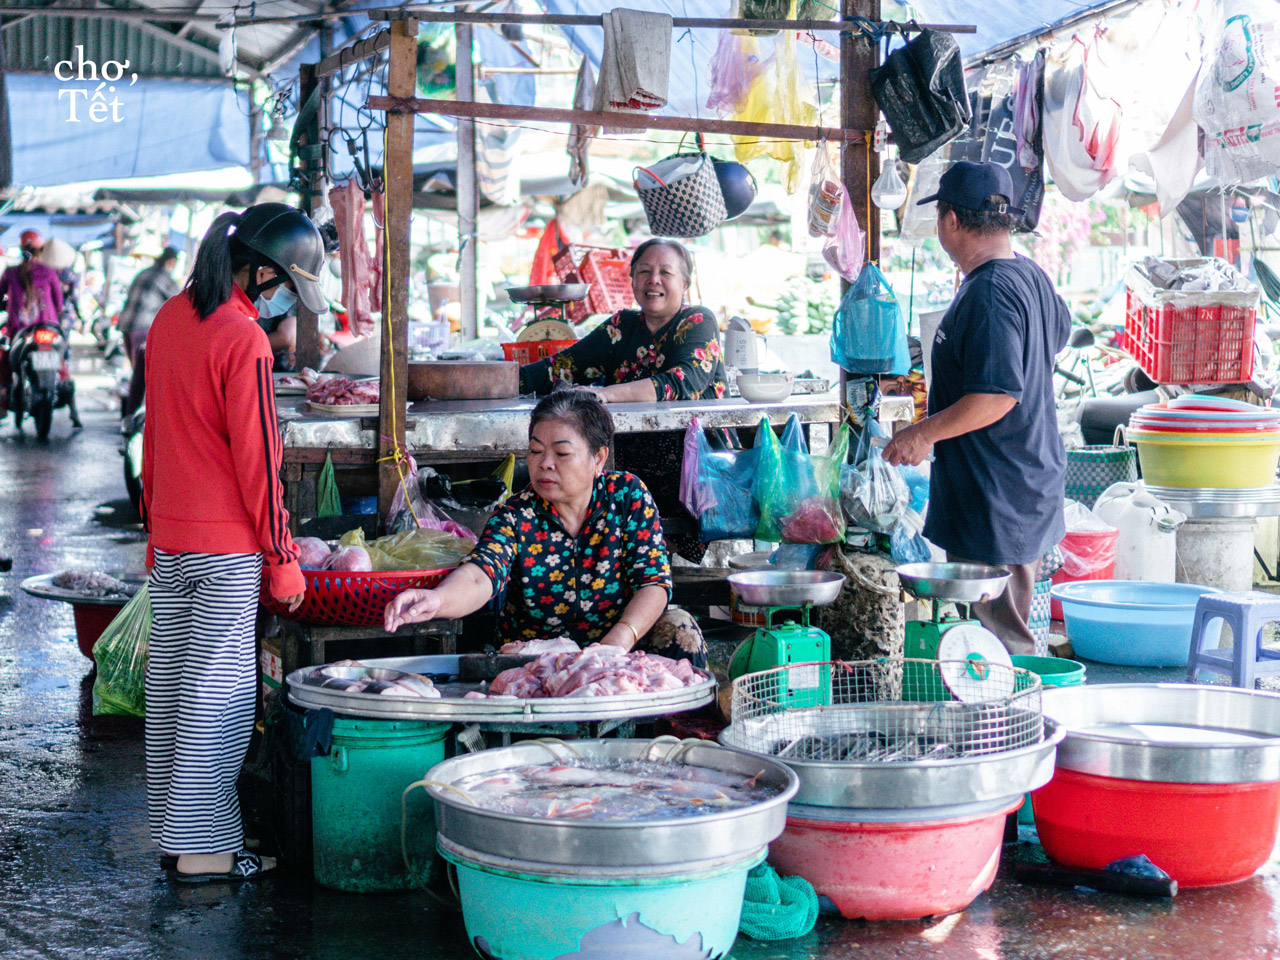 Roadside stalls at a traditional market in Vietnam